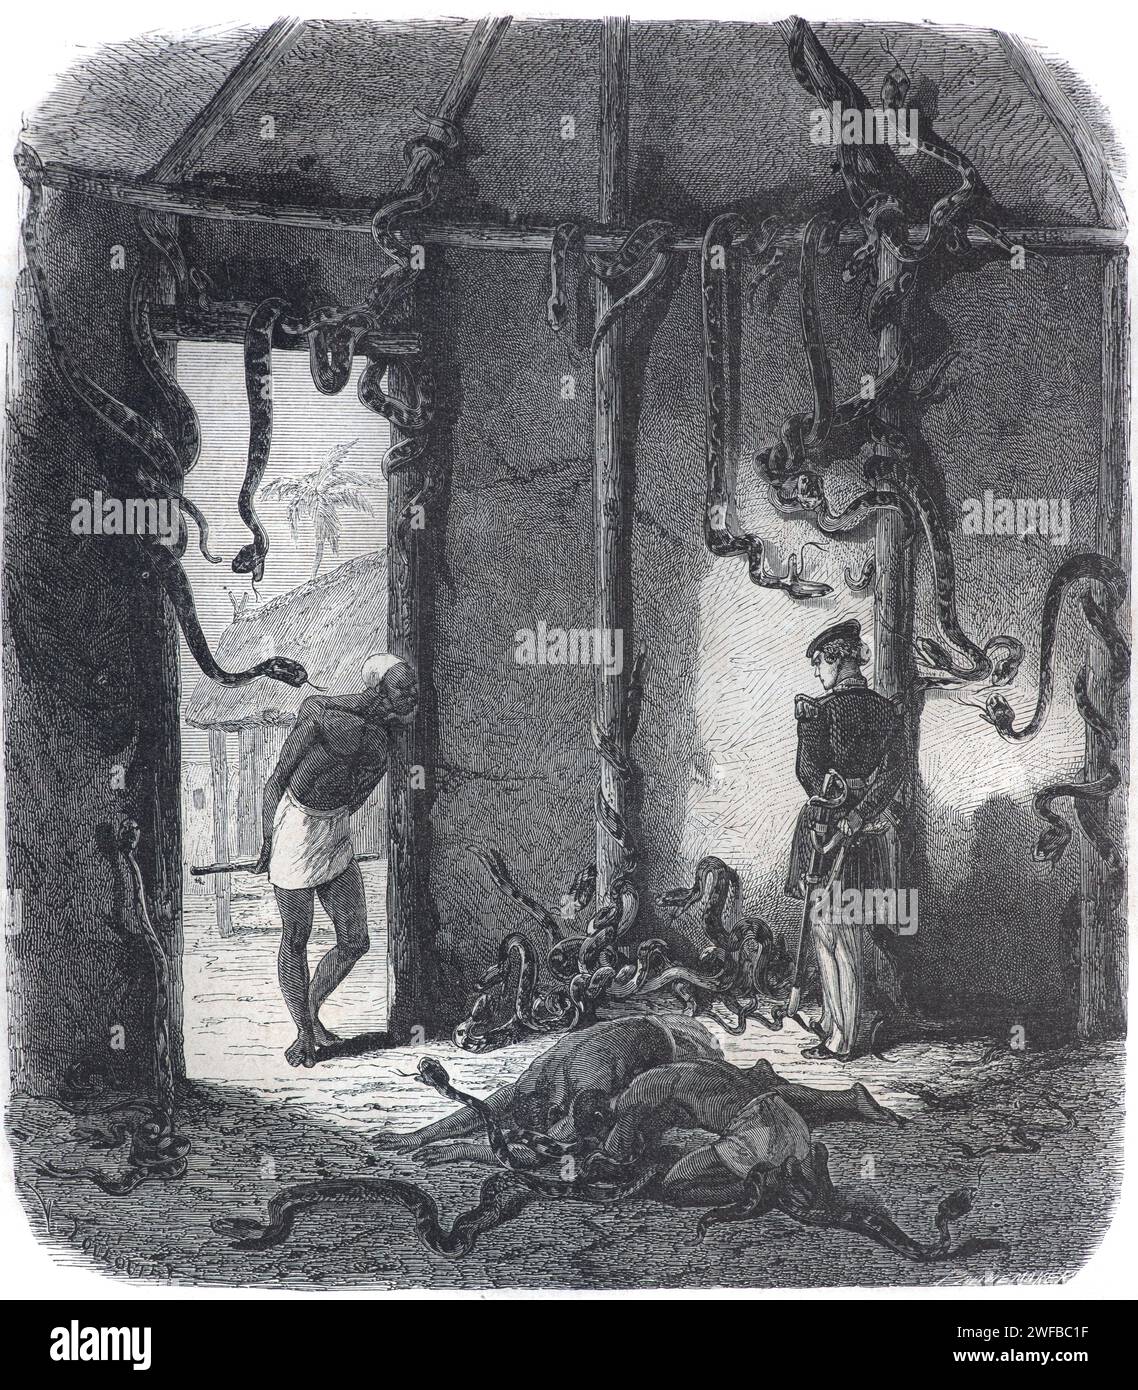 Interior of the Snake Temple, or Python Temple, in Ouidah or Whydah in the former Kingdom of Dahomey (1600-1904) now the Republic of Benin West Africa where Believers Worship a Snake Deity known as Dangbe or Danh-gbi. Oiudah is known as a main centre of West African Vodun or Voodoo. Vintage or Historical Engraving or Illustration 1863 Stock Photo